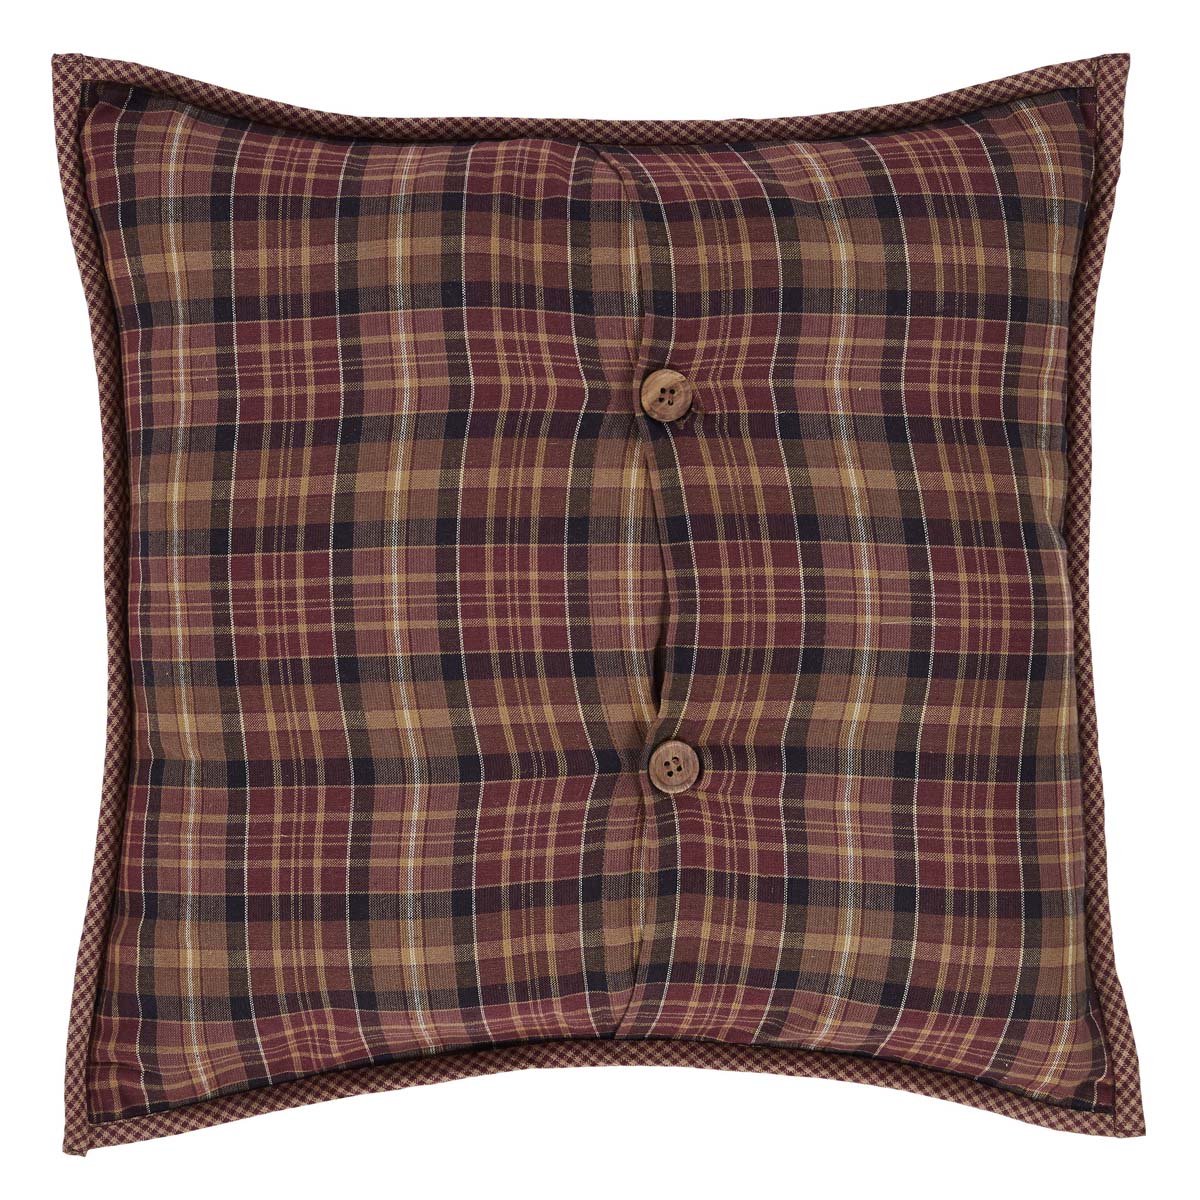 32890-Abilene-Star-Quilted-Pillow-16x16-image-6